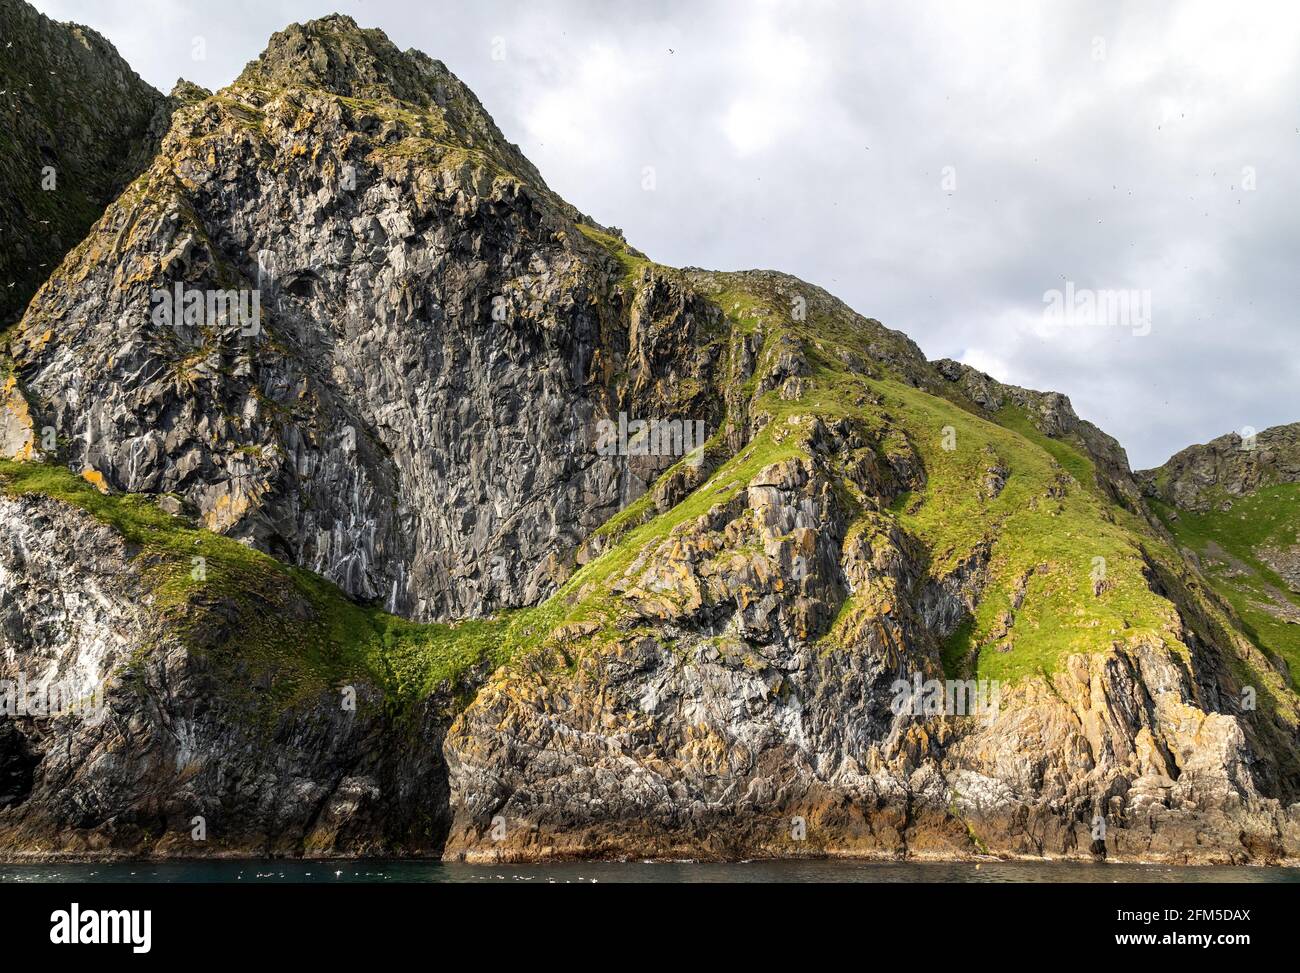 One of the steep cliffs at Runde bird island, west coast of Norway. Stock Photo